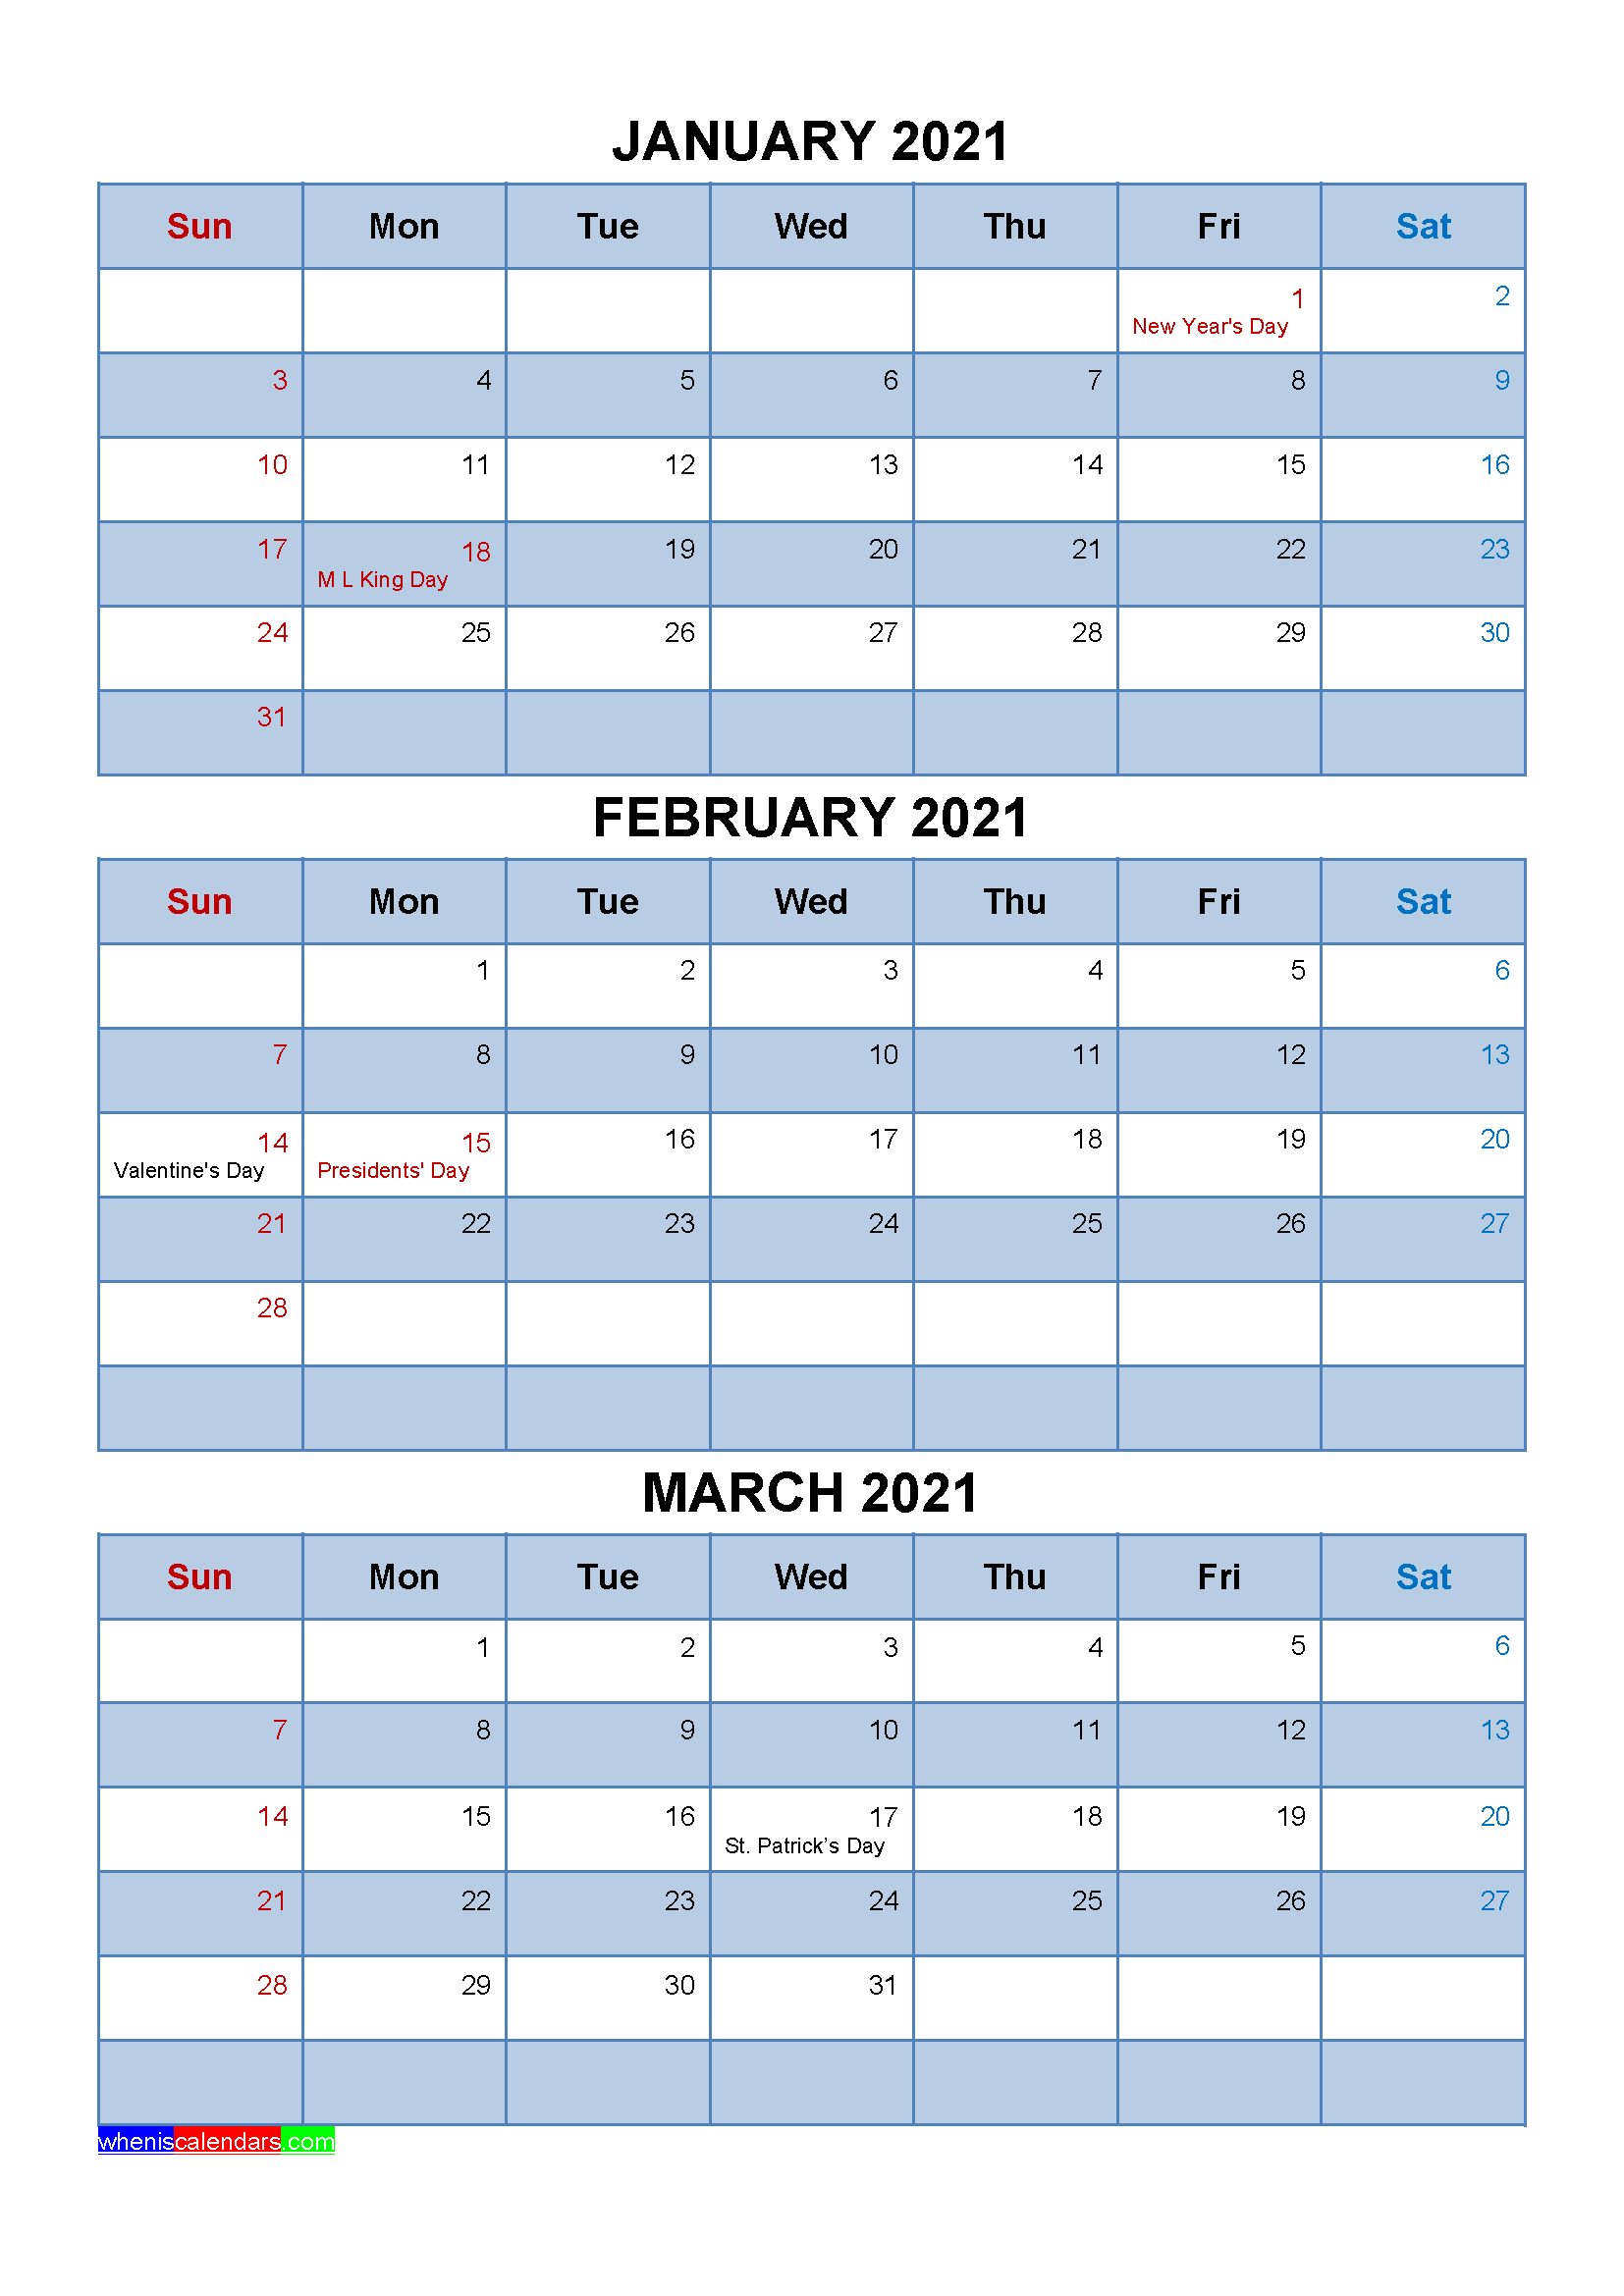 Free Calendar January February March 2021 with Holidays